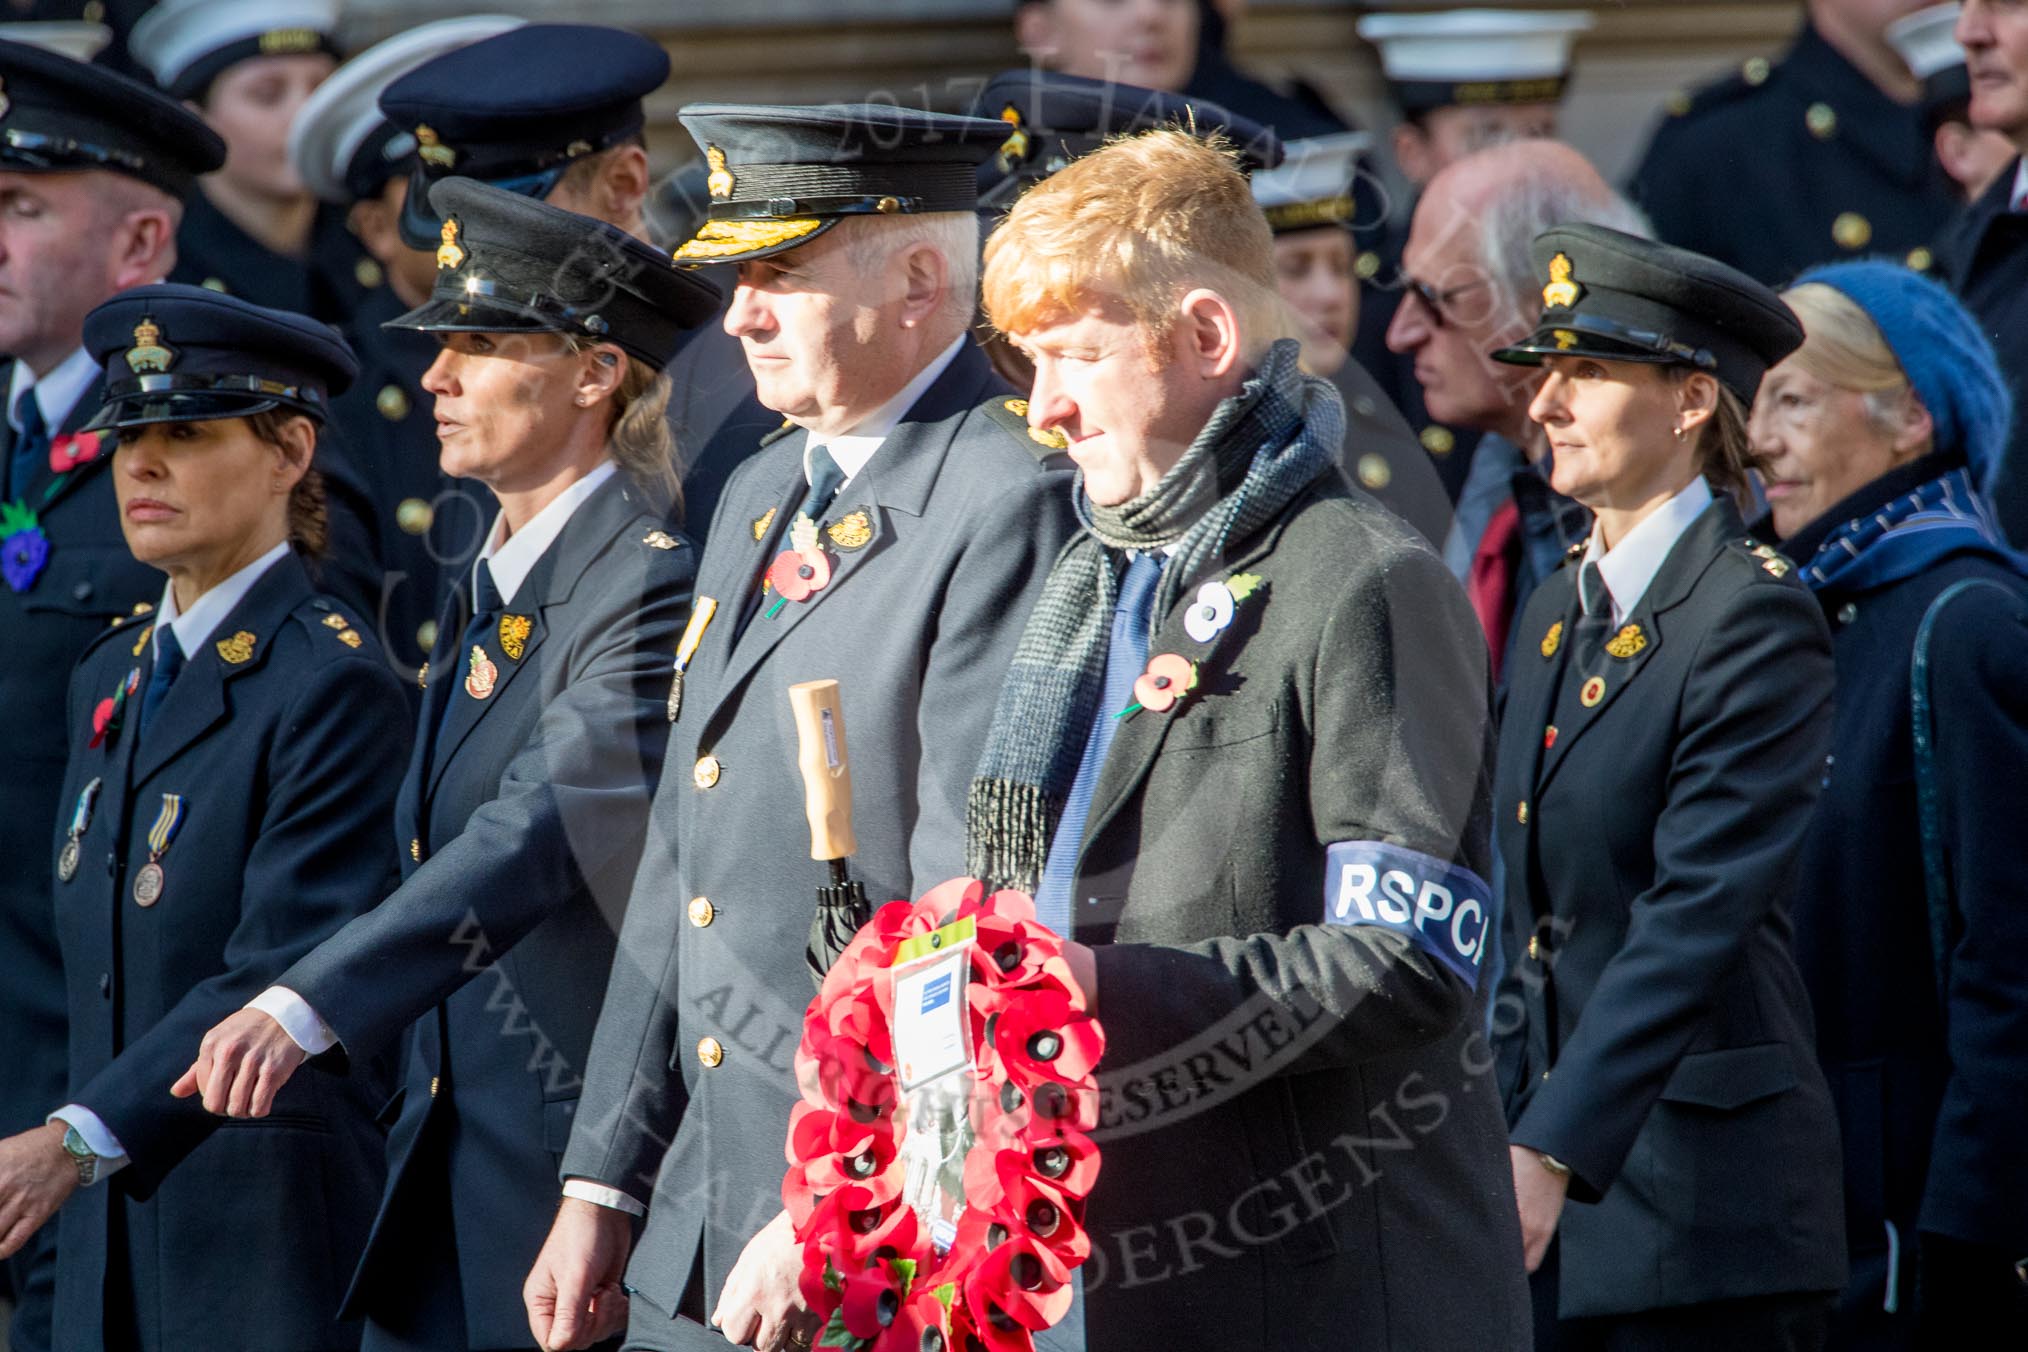 RSPCA (Group M19, 22 members) during the Royal British Legion March Past on Remembrance Sunday at the Cenotaph, Whitehall, Westminster, London, 11 November 2018, 12:27.